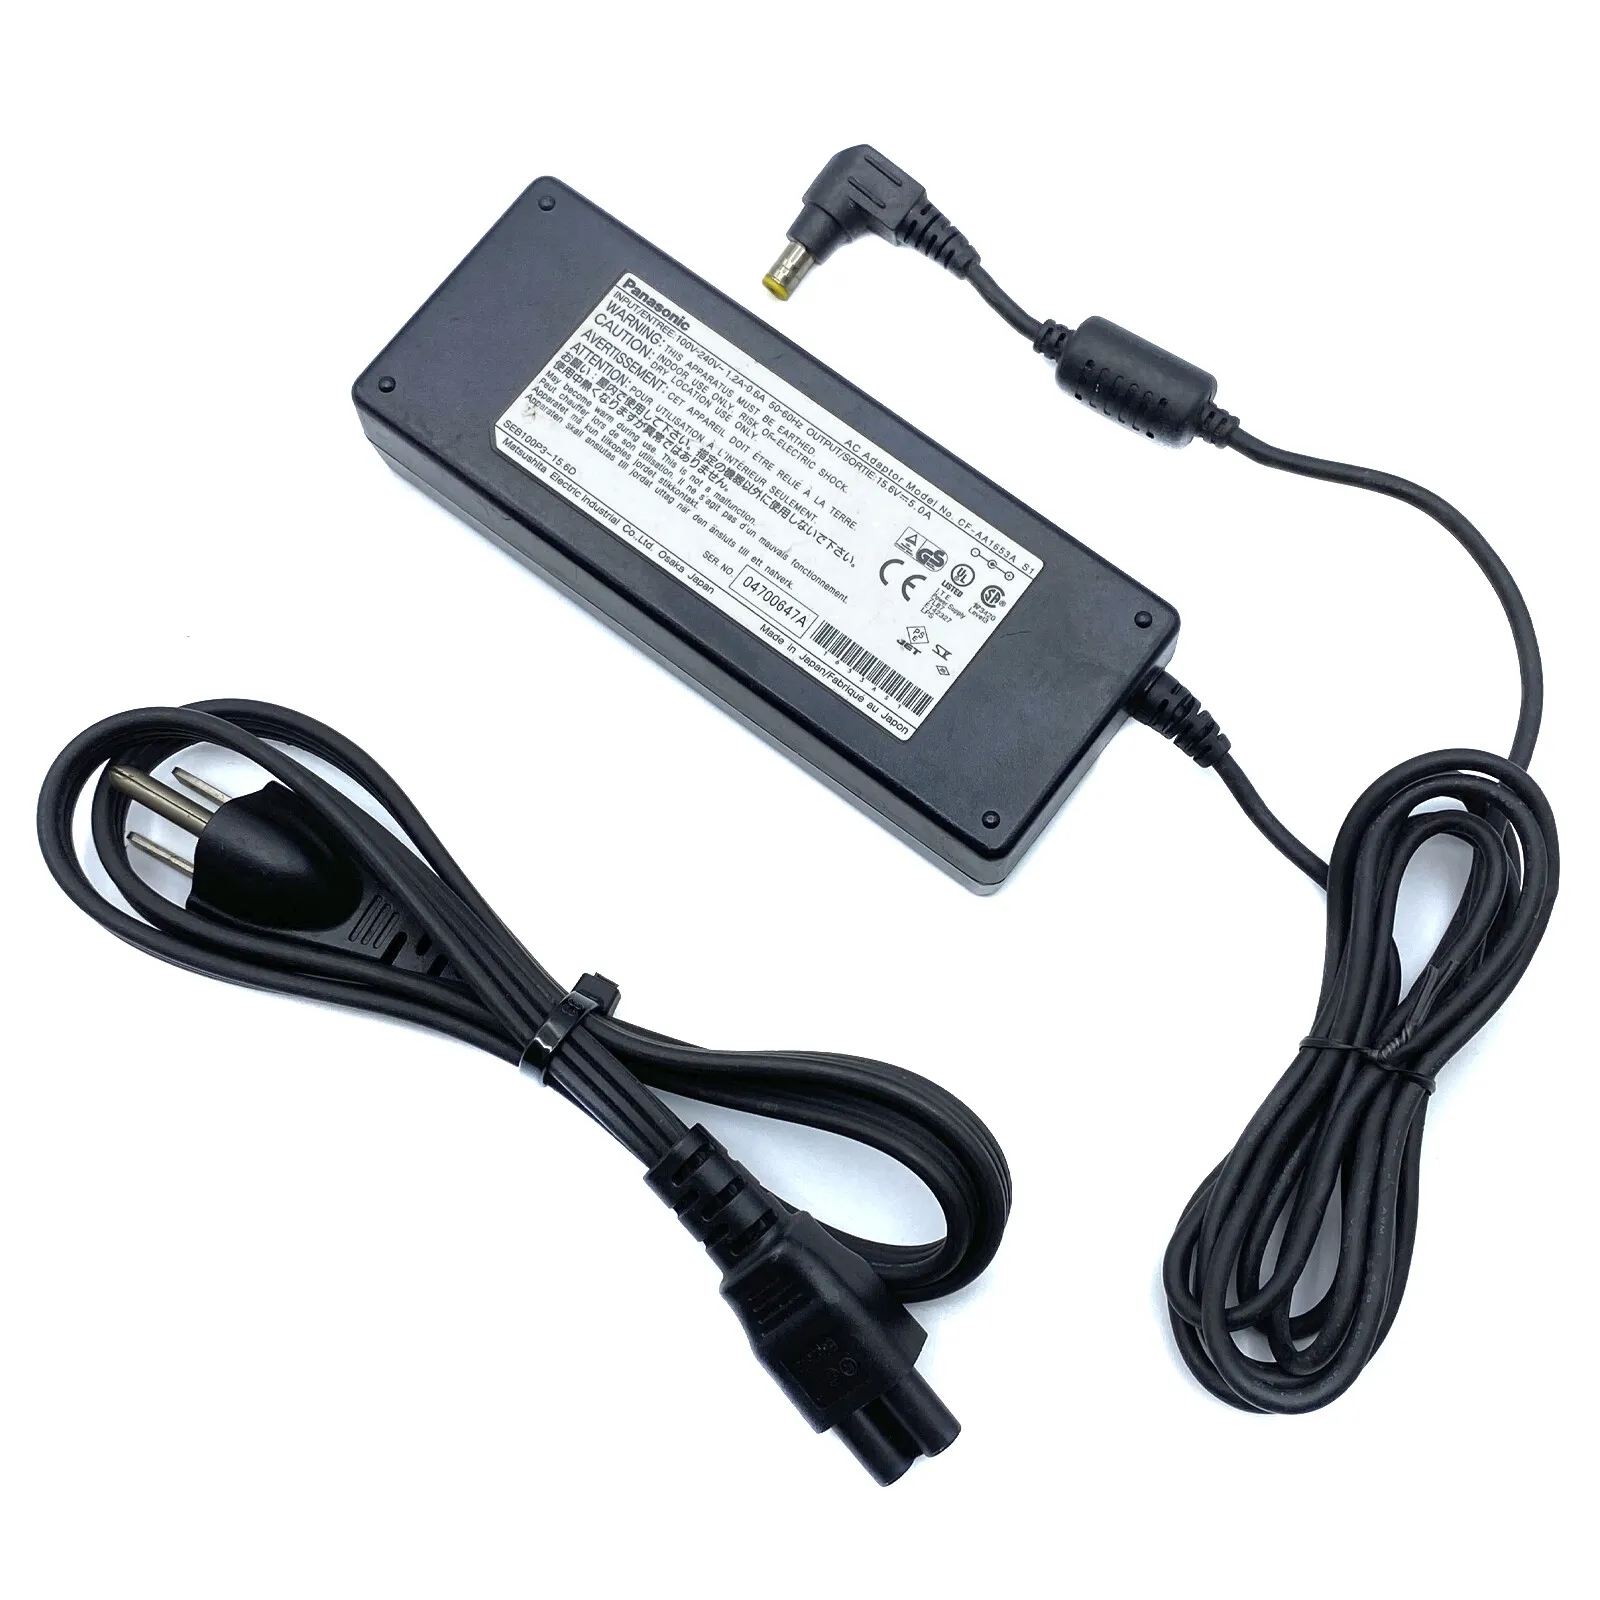 *Brand NEW*Genuine Panasonic CF-AA1653A S1 15.6V 5A 78W AC Adapter for Toughbook Laptop CF-19 CF-20 - Click Image to Close